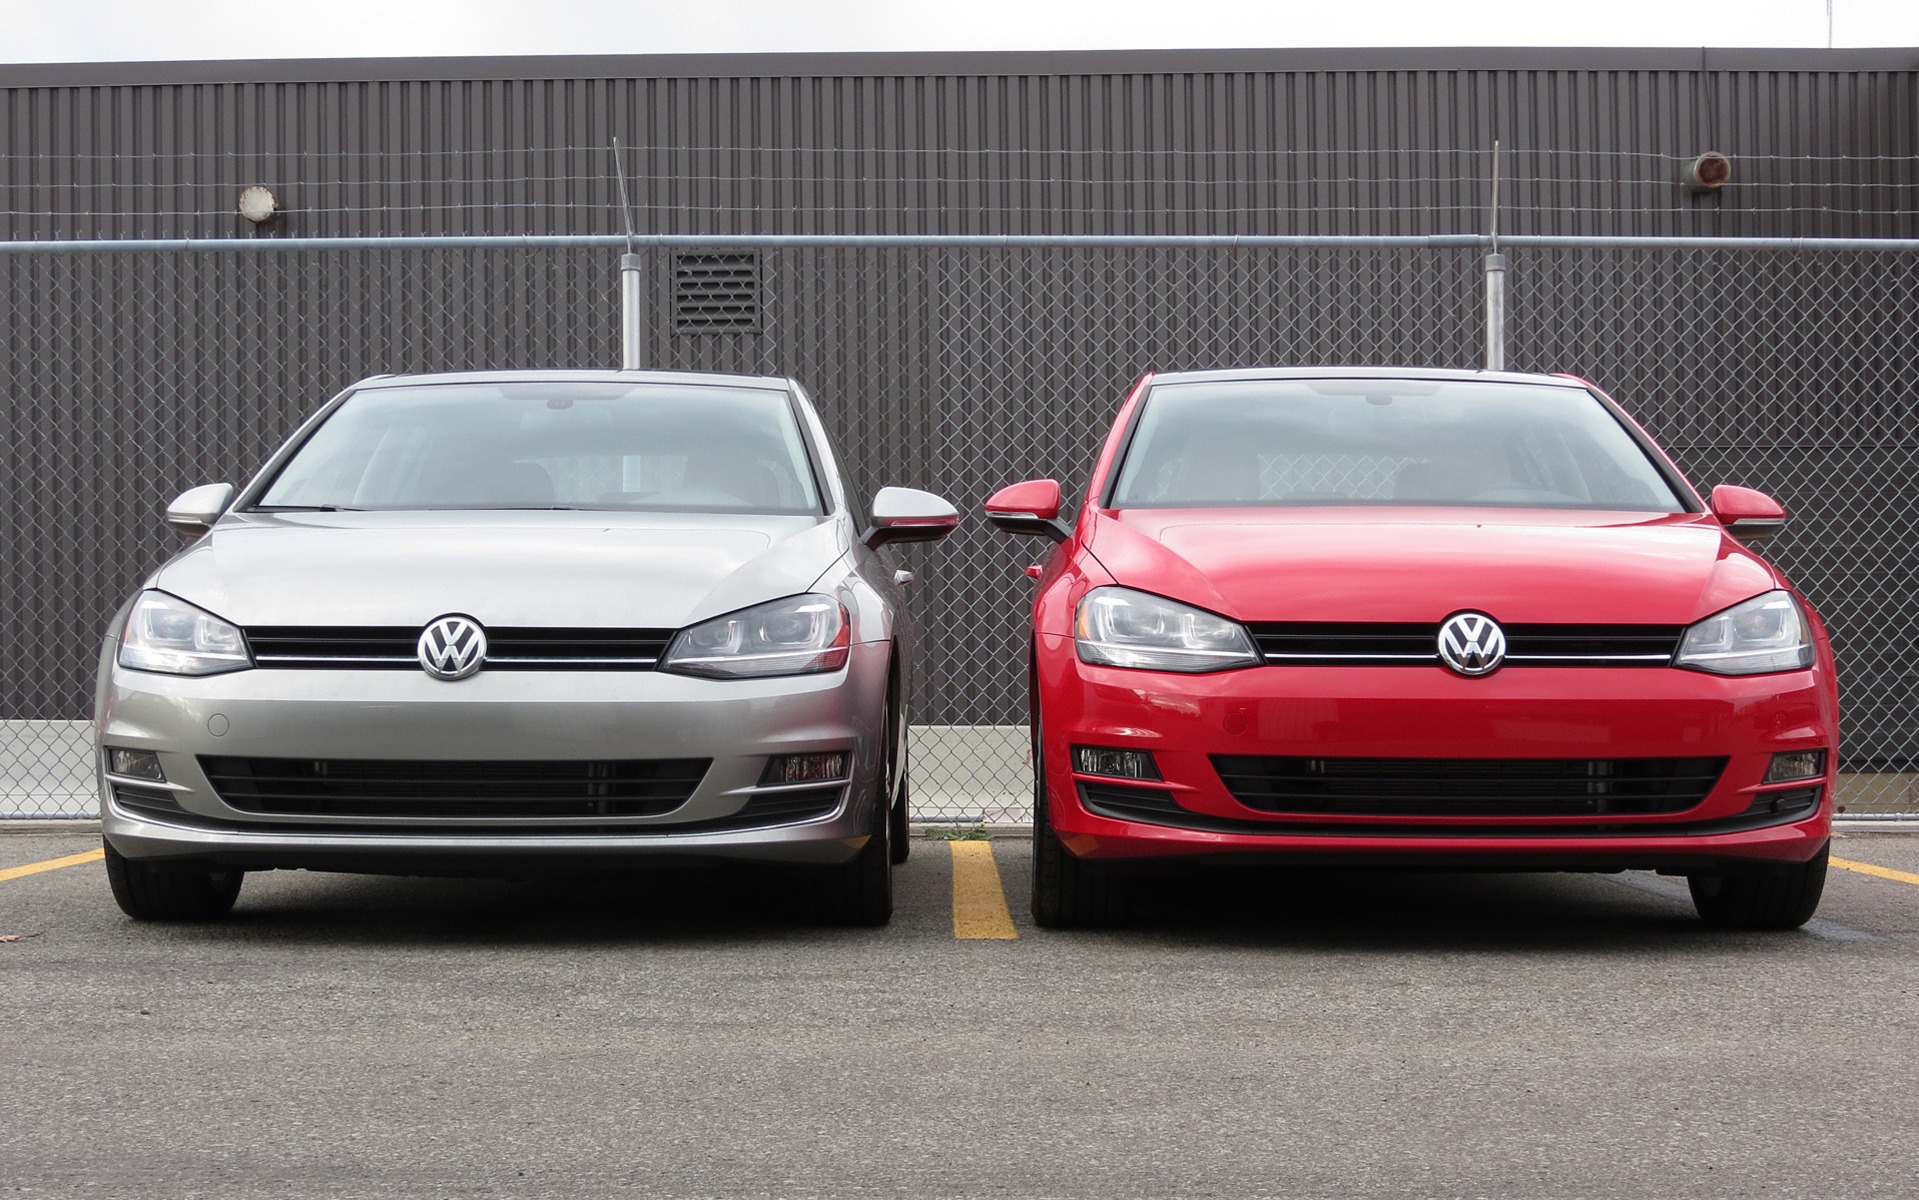 Volkswagen Golf Tdi Versus Golf Tsi 15 Two Tests Over 4 000 Km The Car Guide